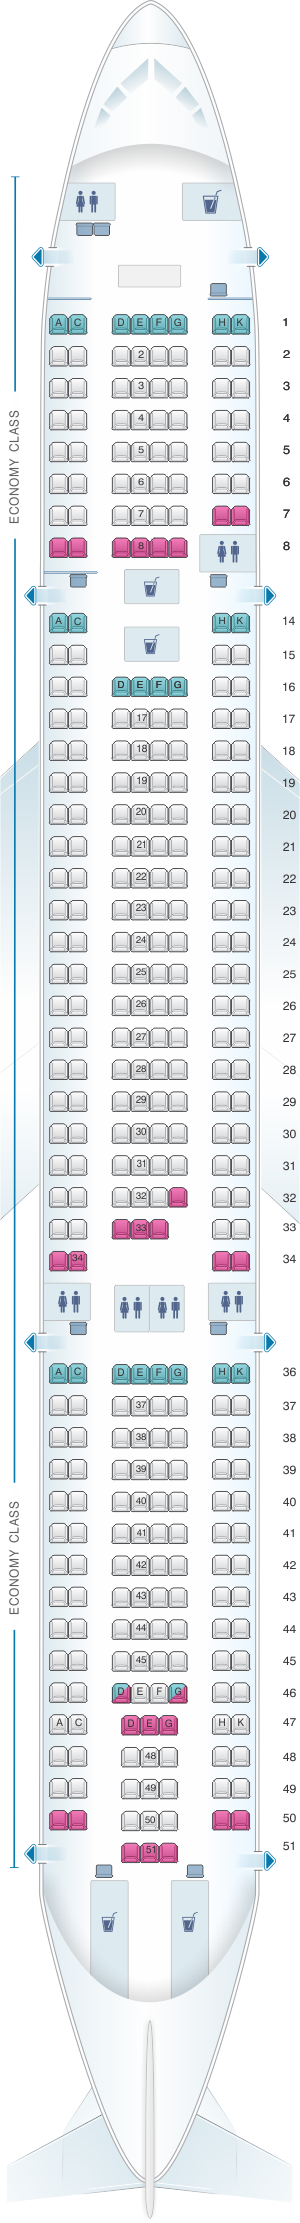 Seat map for airberlin Airbus A330 200 Config.2